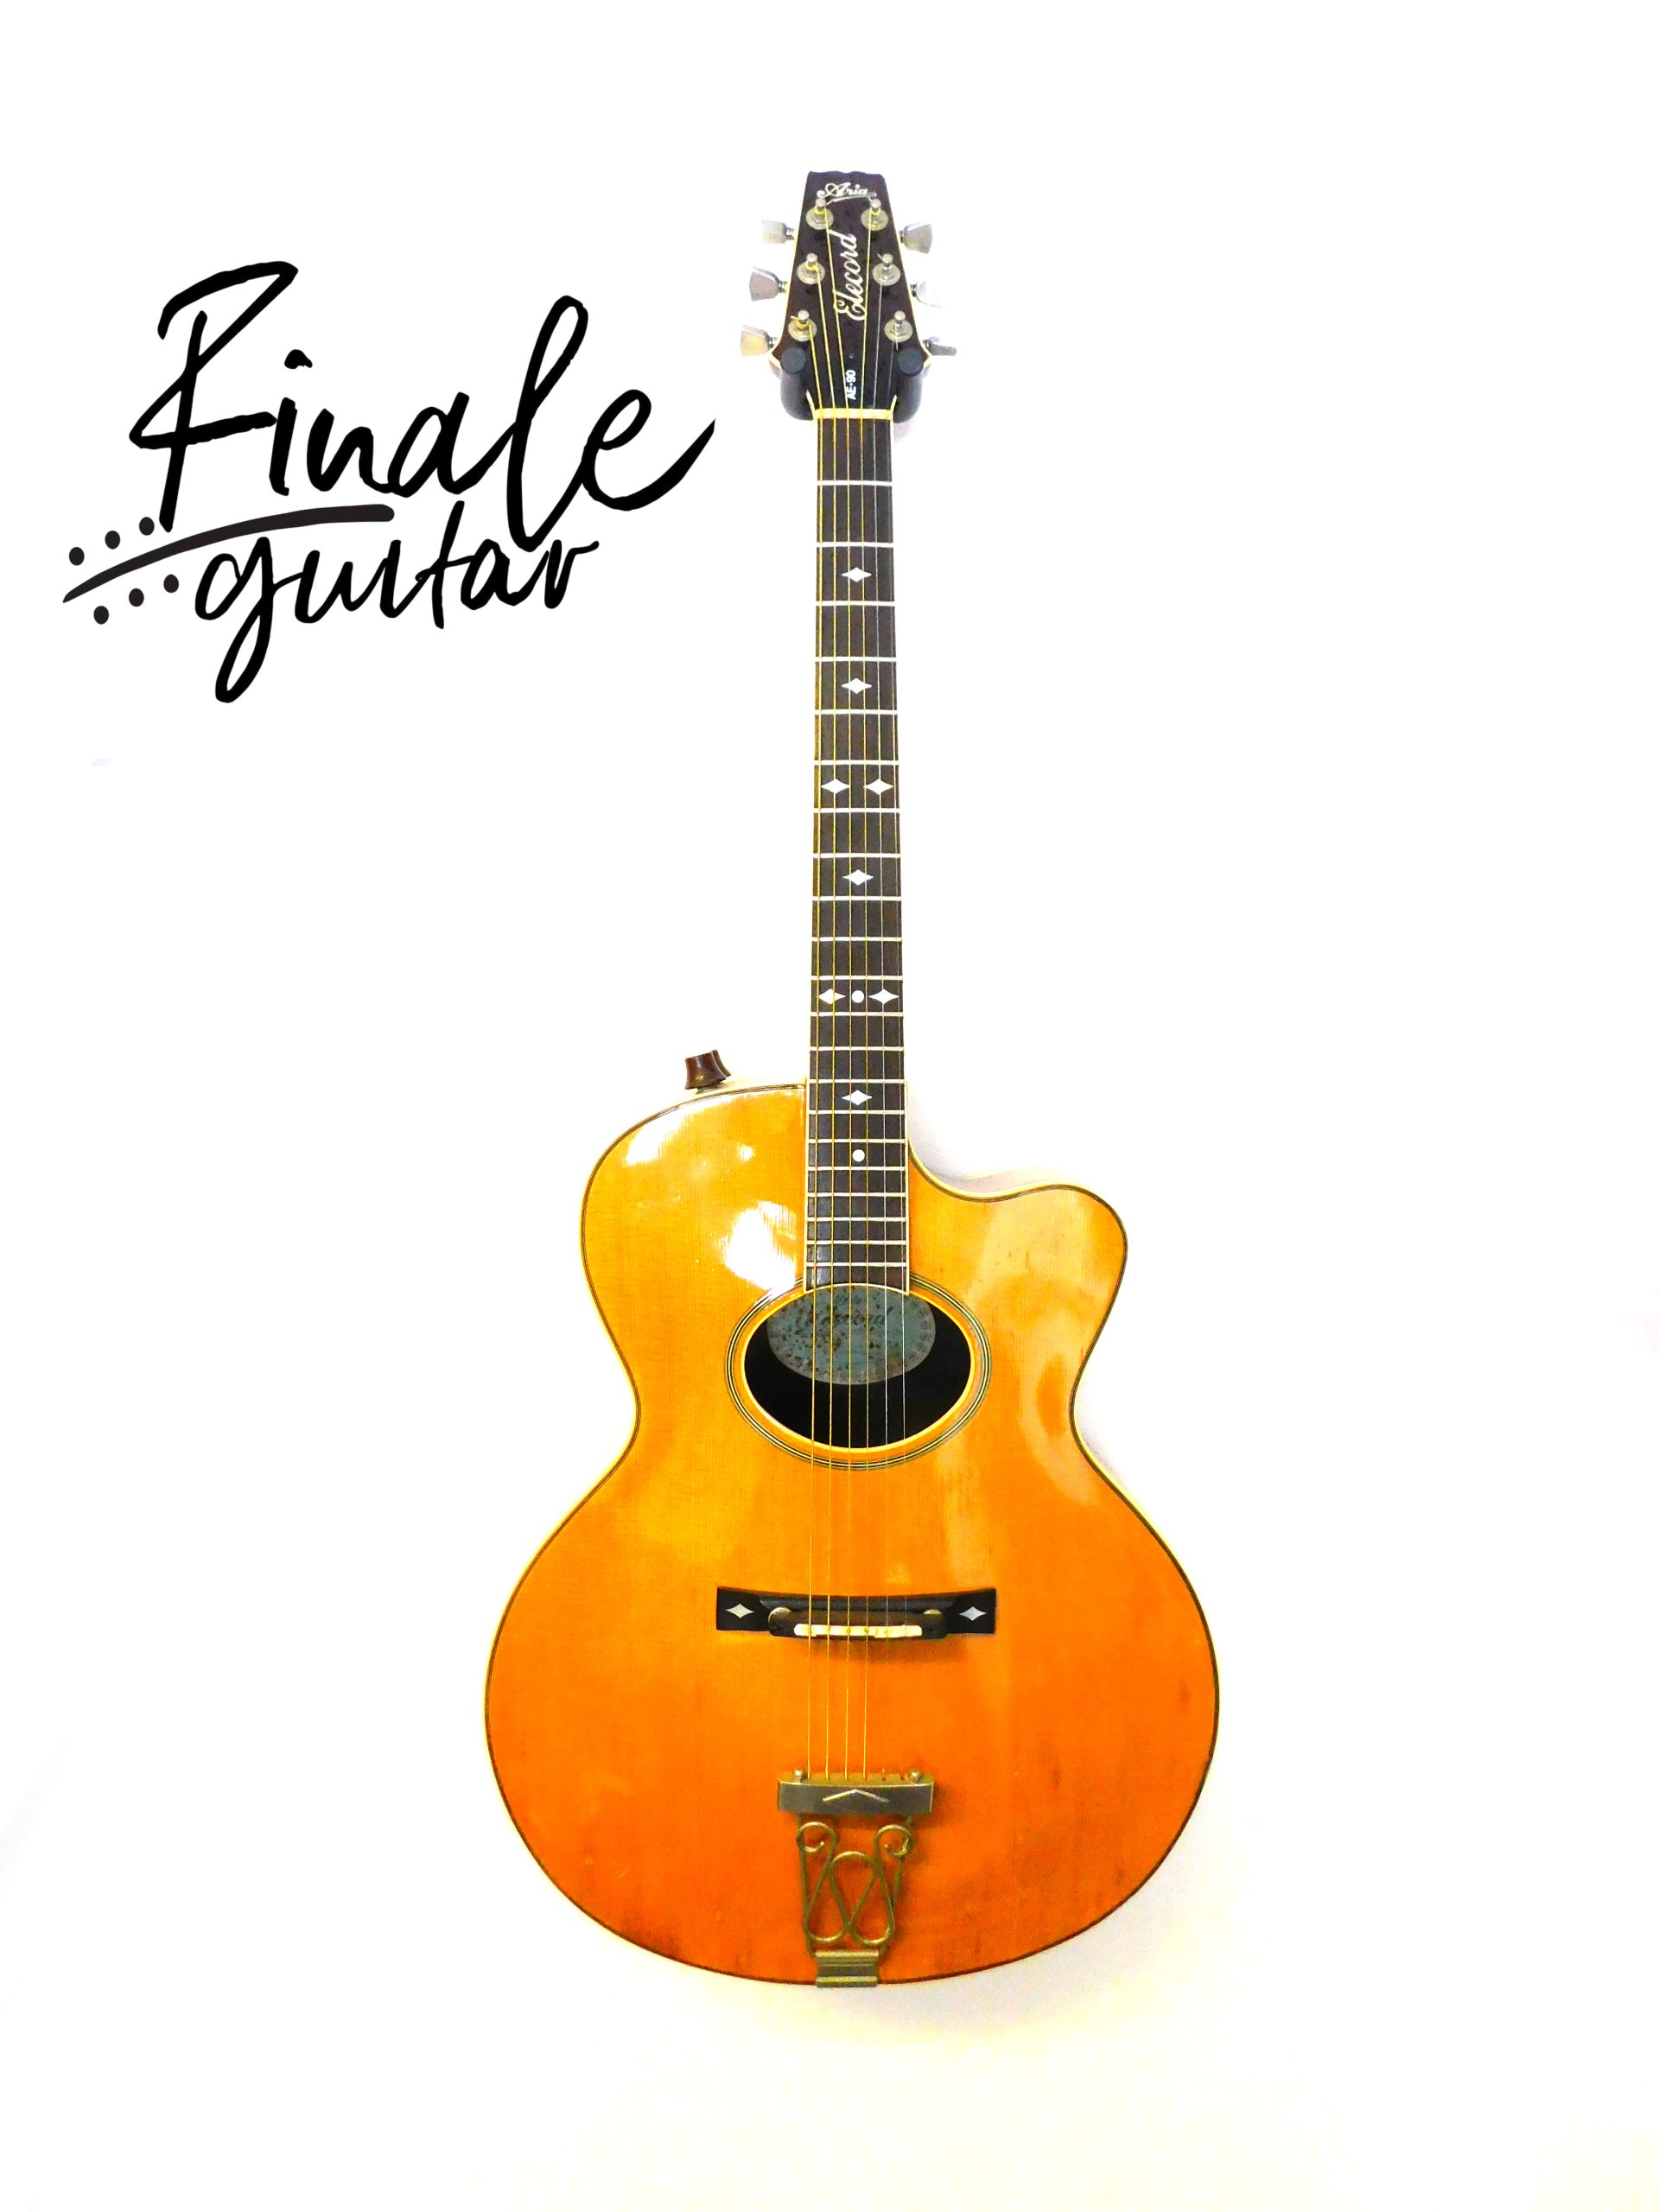 Aria Elecord AE90 electro-acoustic hybrid archtop, MIJ 1981 - Finale 